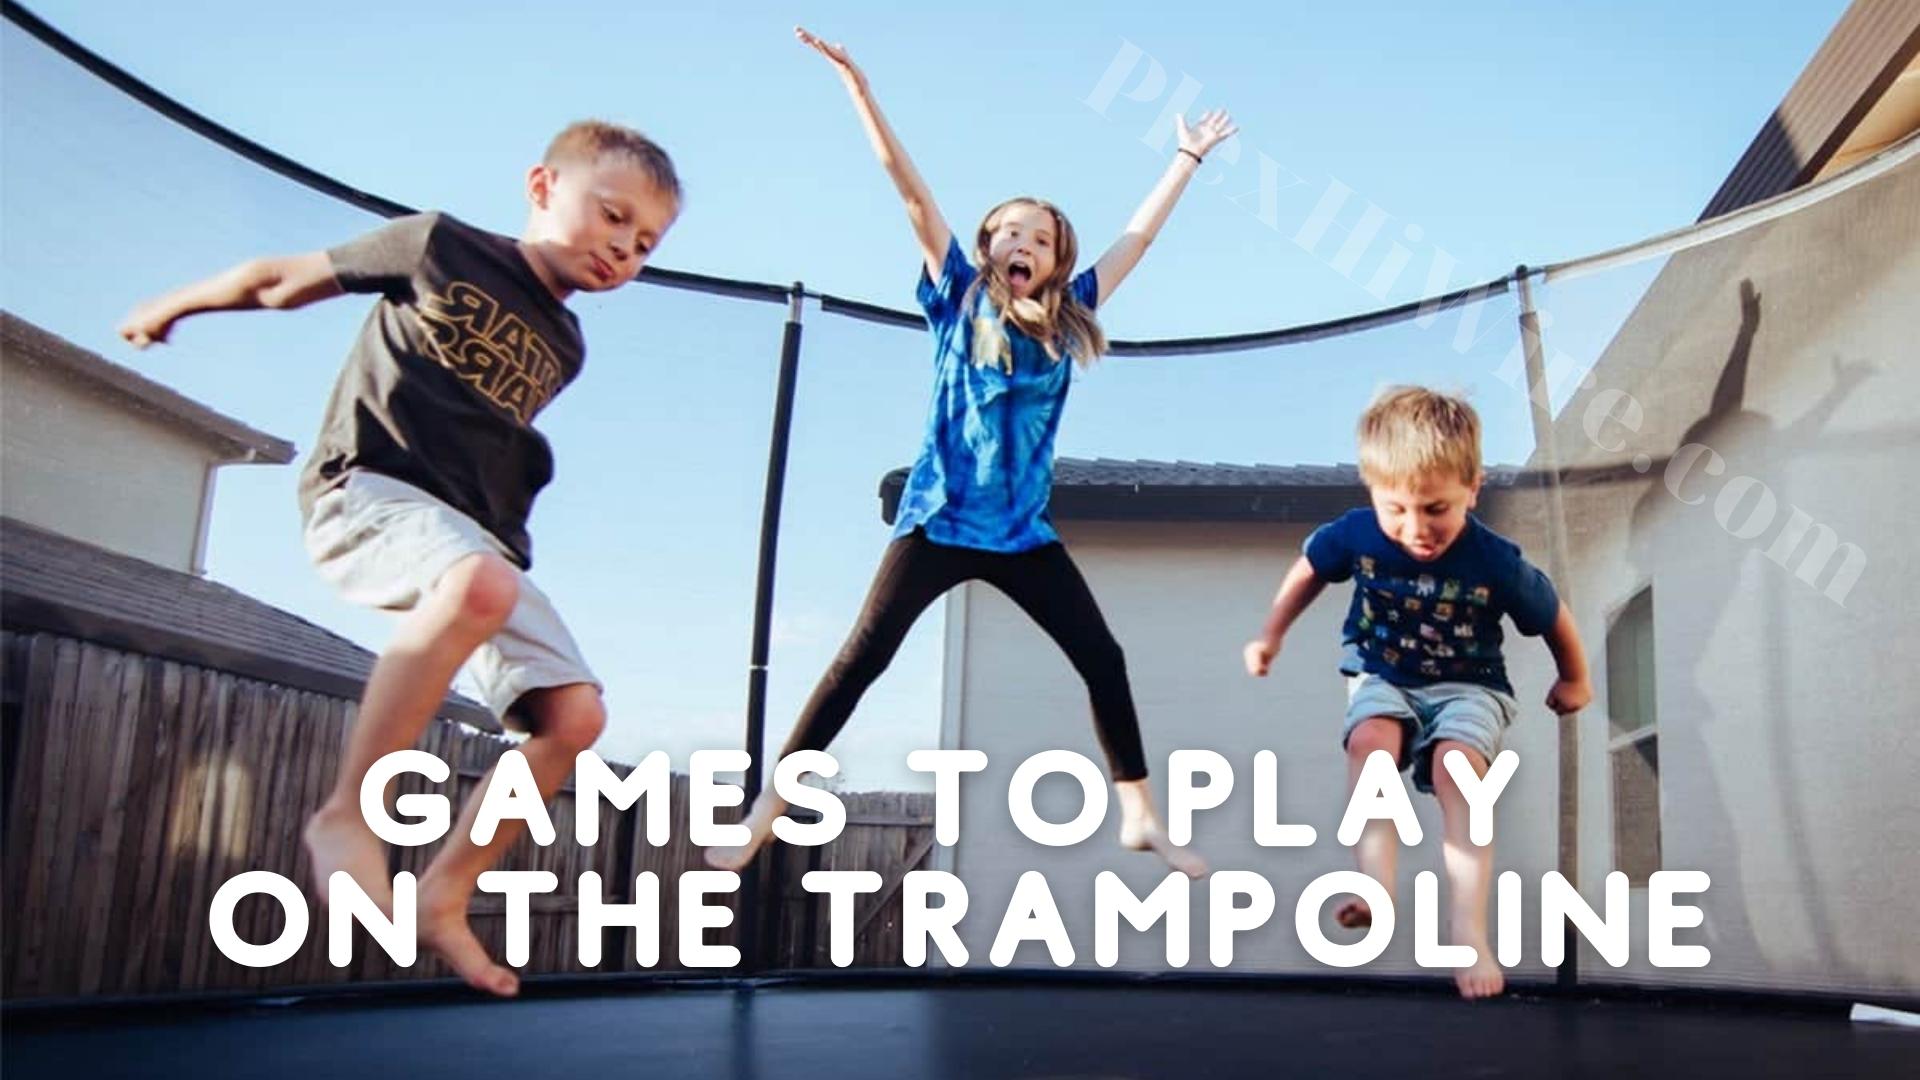 Games to Play on The Trampoline